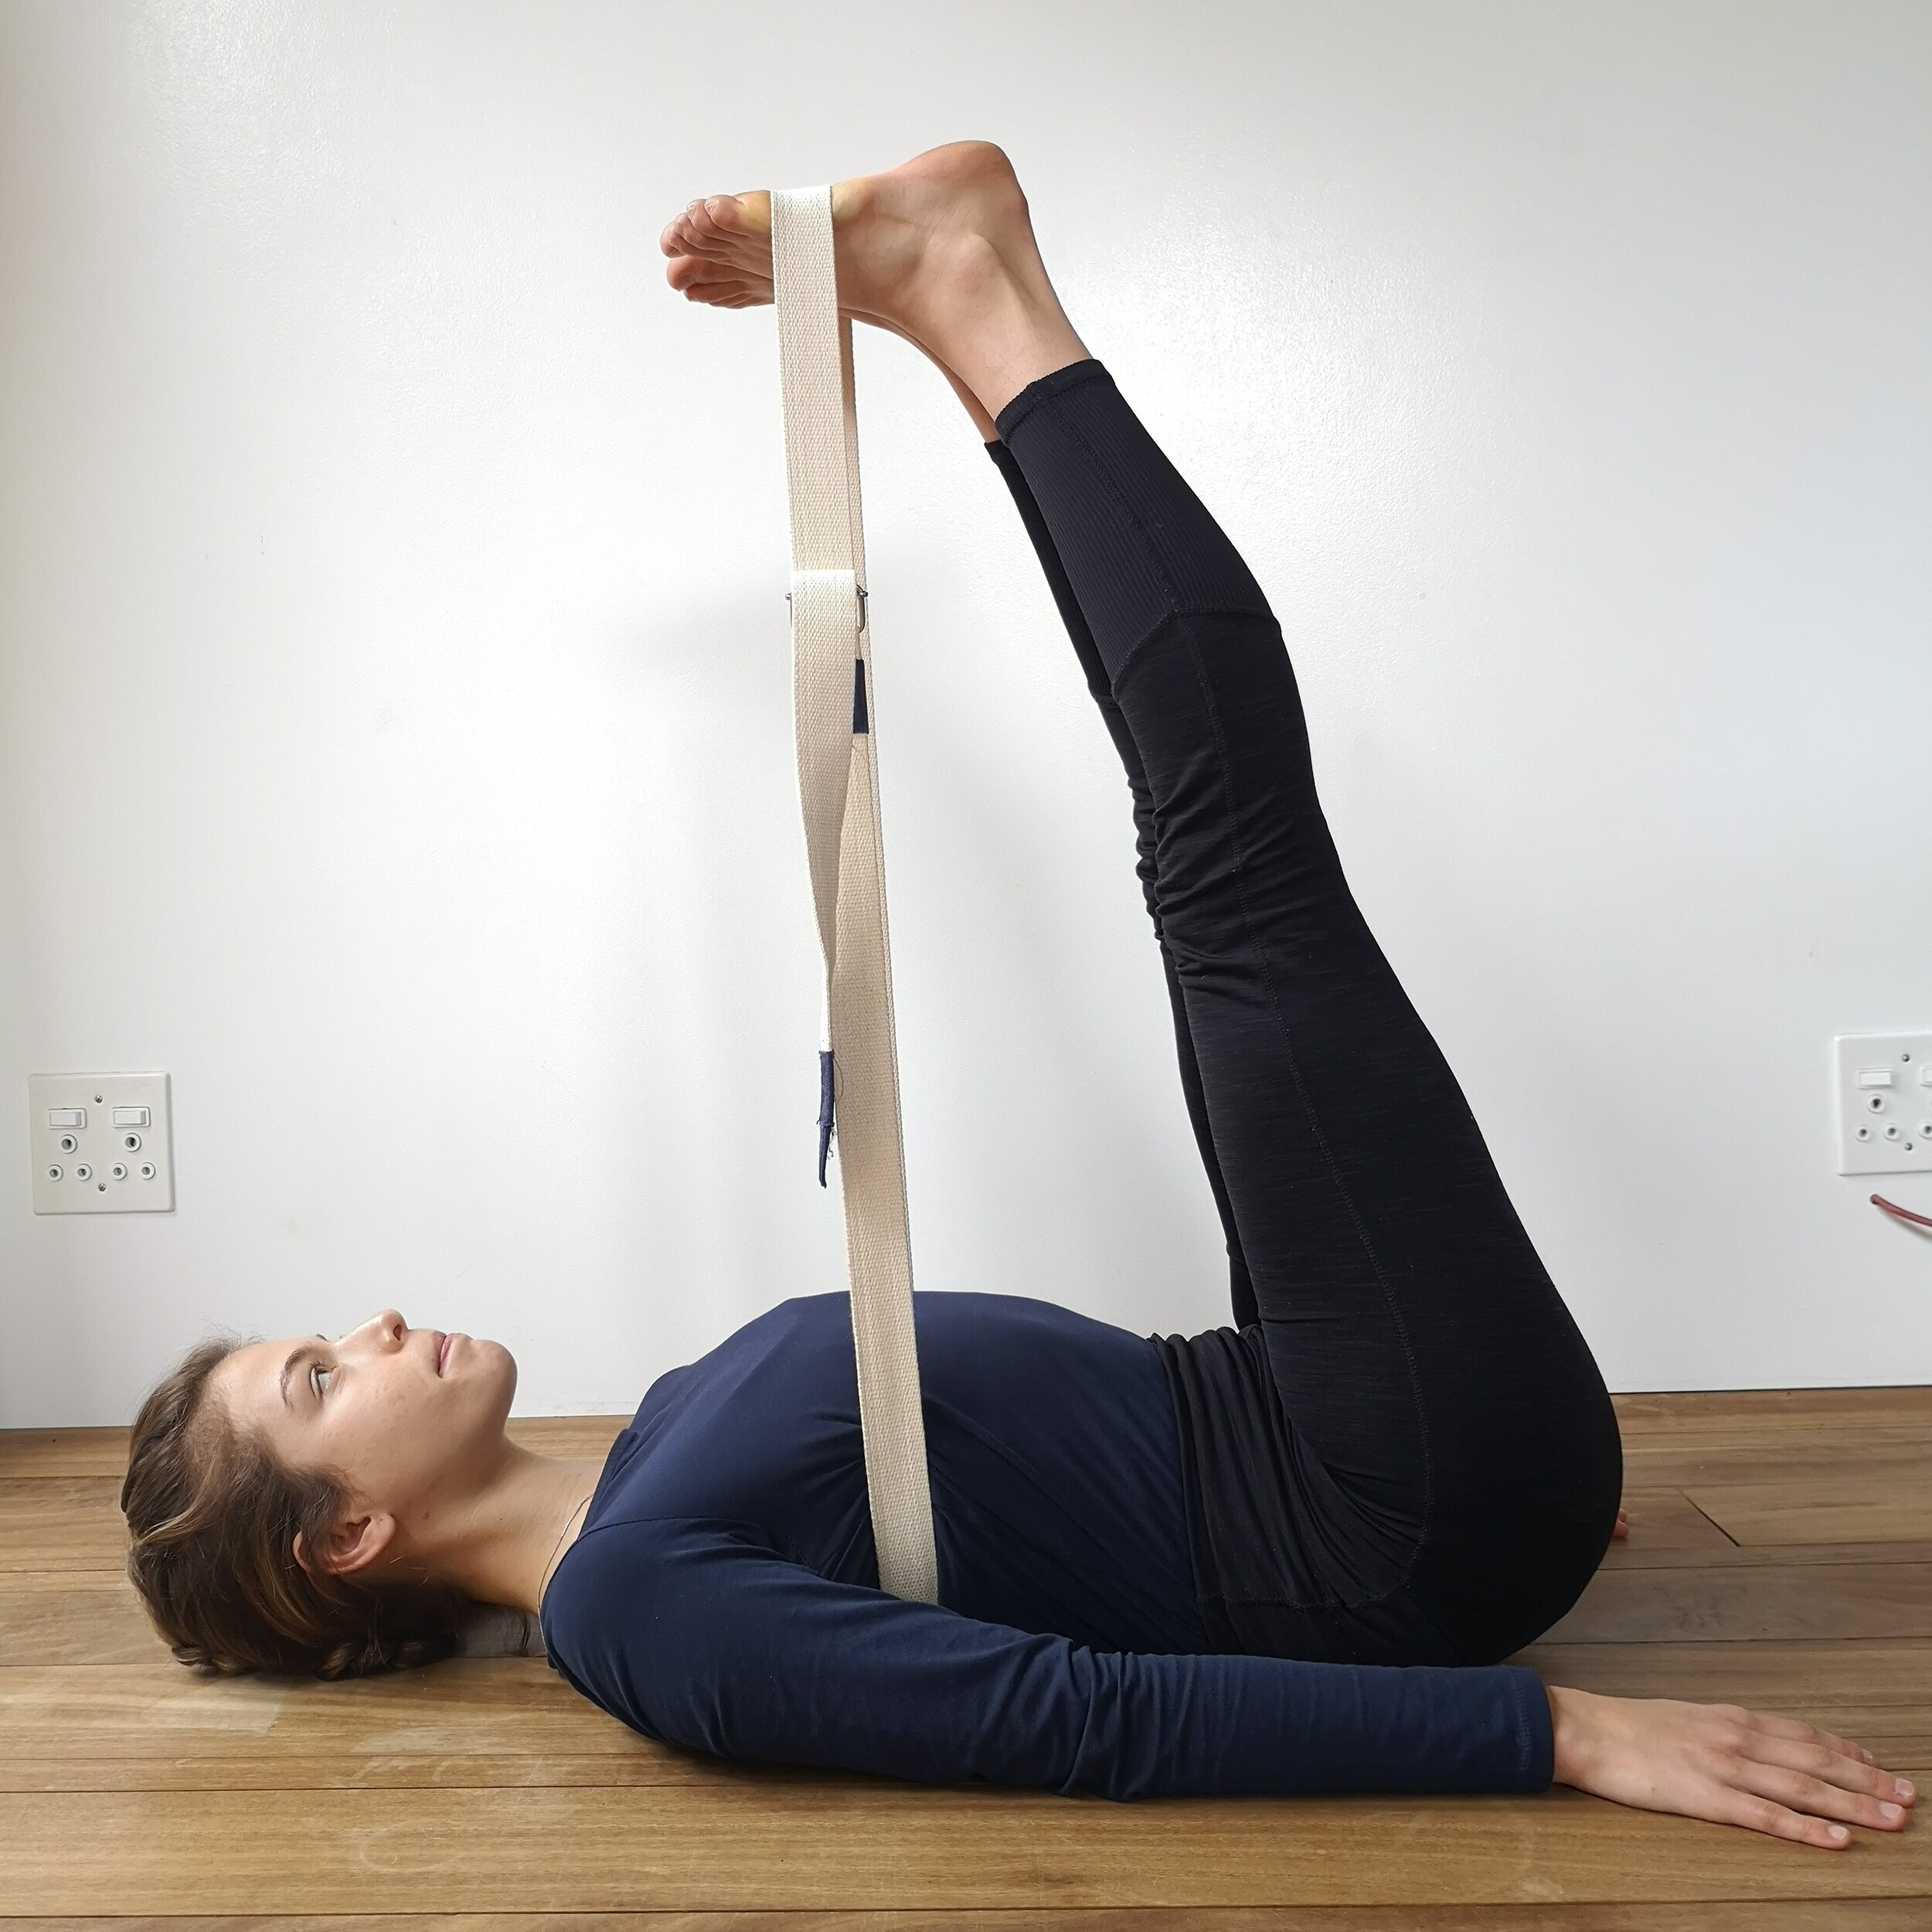 10 Creative Ways to use a Yoga Strap in your Practice